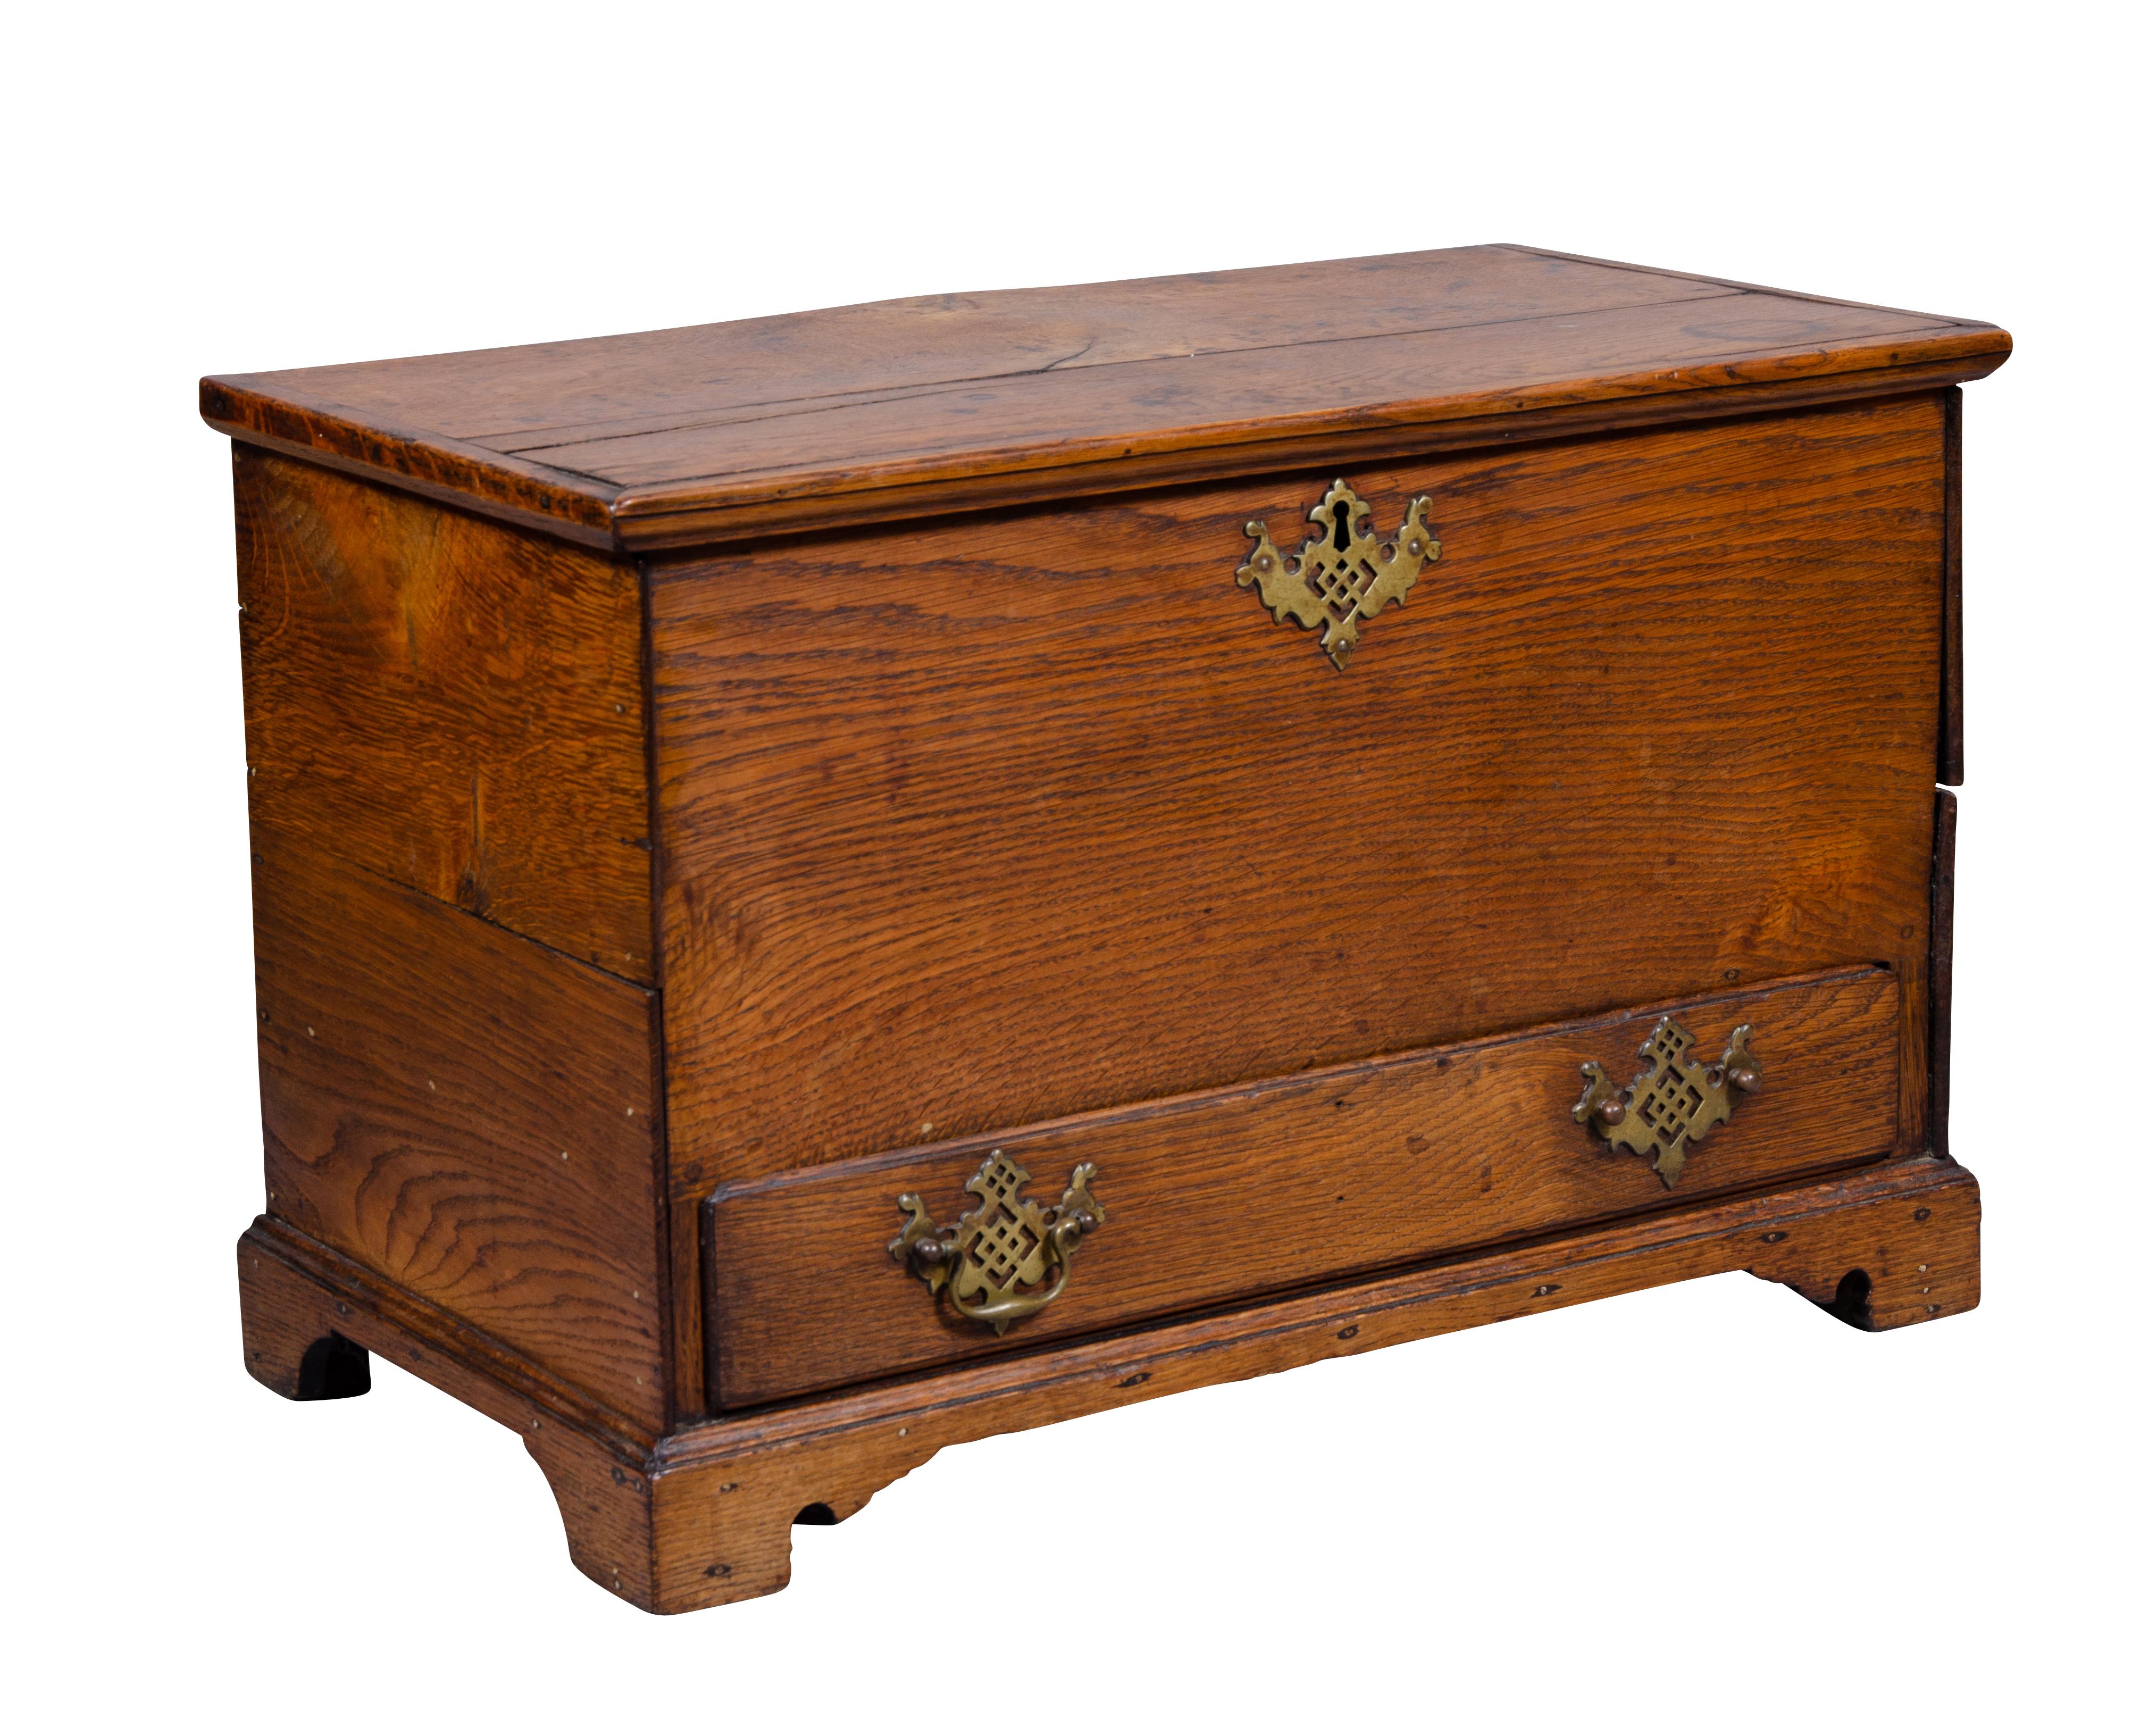 Simple piece with hinged lid opening to a storage compartment over a drawer, bracket feet.